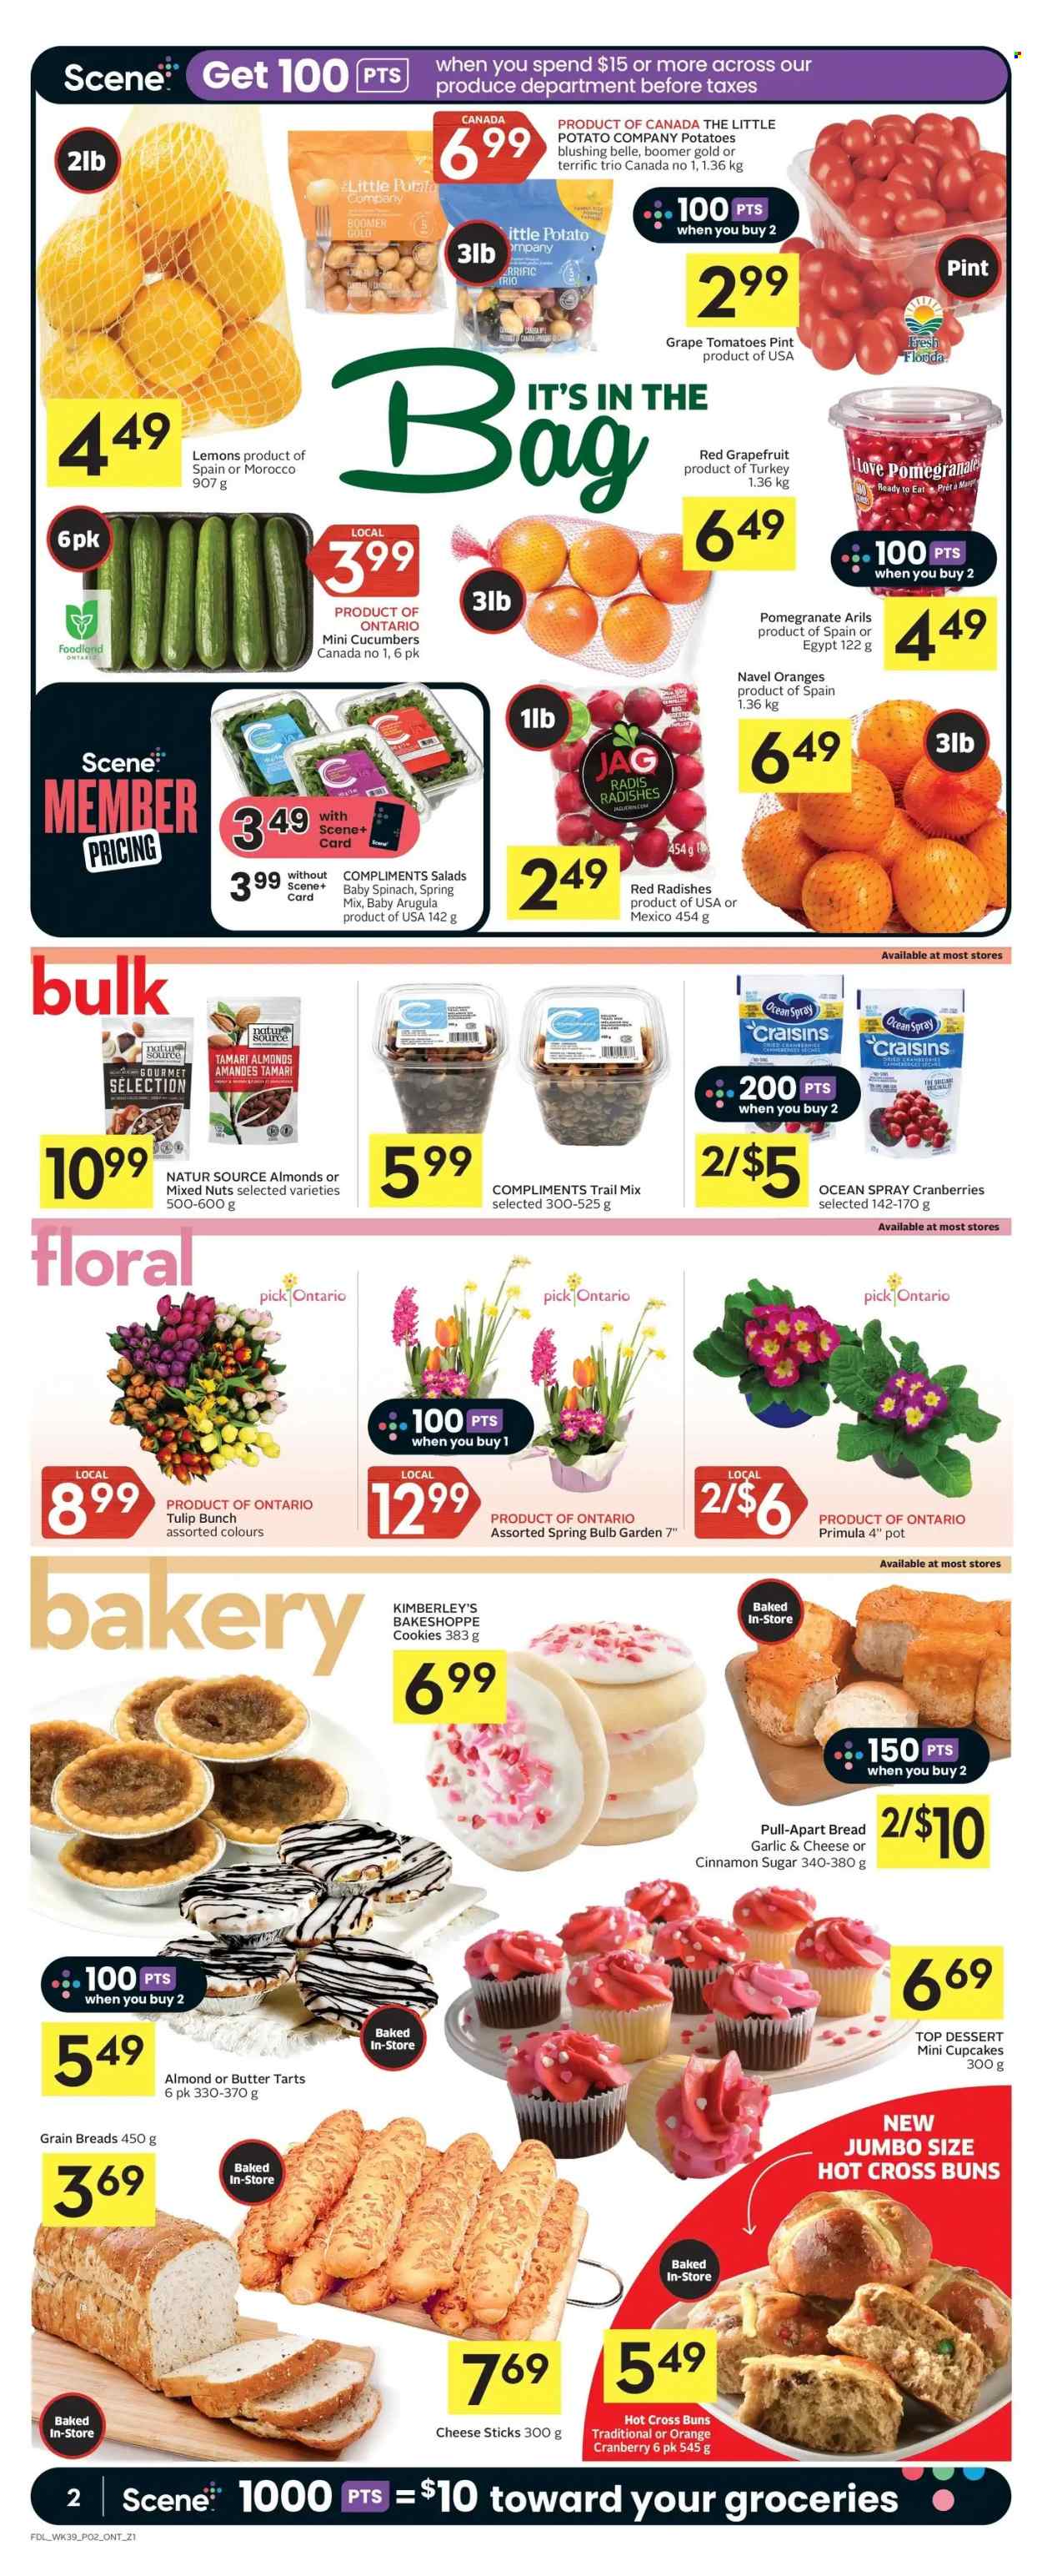 thumbnail - Foodland Flyer - January 26, 2023 - February 01, 2023 - Sales products - bread, buns, cupcake, arugula, cucumber, radishes, spinach, tomatoes, potatoes, grapefruits, oranges, pomegranate, lemons, navel oranges, cheese sticks, cookies, sugar, craisins, cranberries, cinnamon, almonds, dried fruit, mixed nuts, trail mix, Fanta, pot, primroses. Page 2.